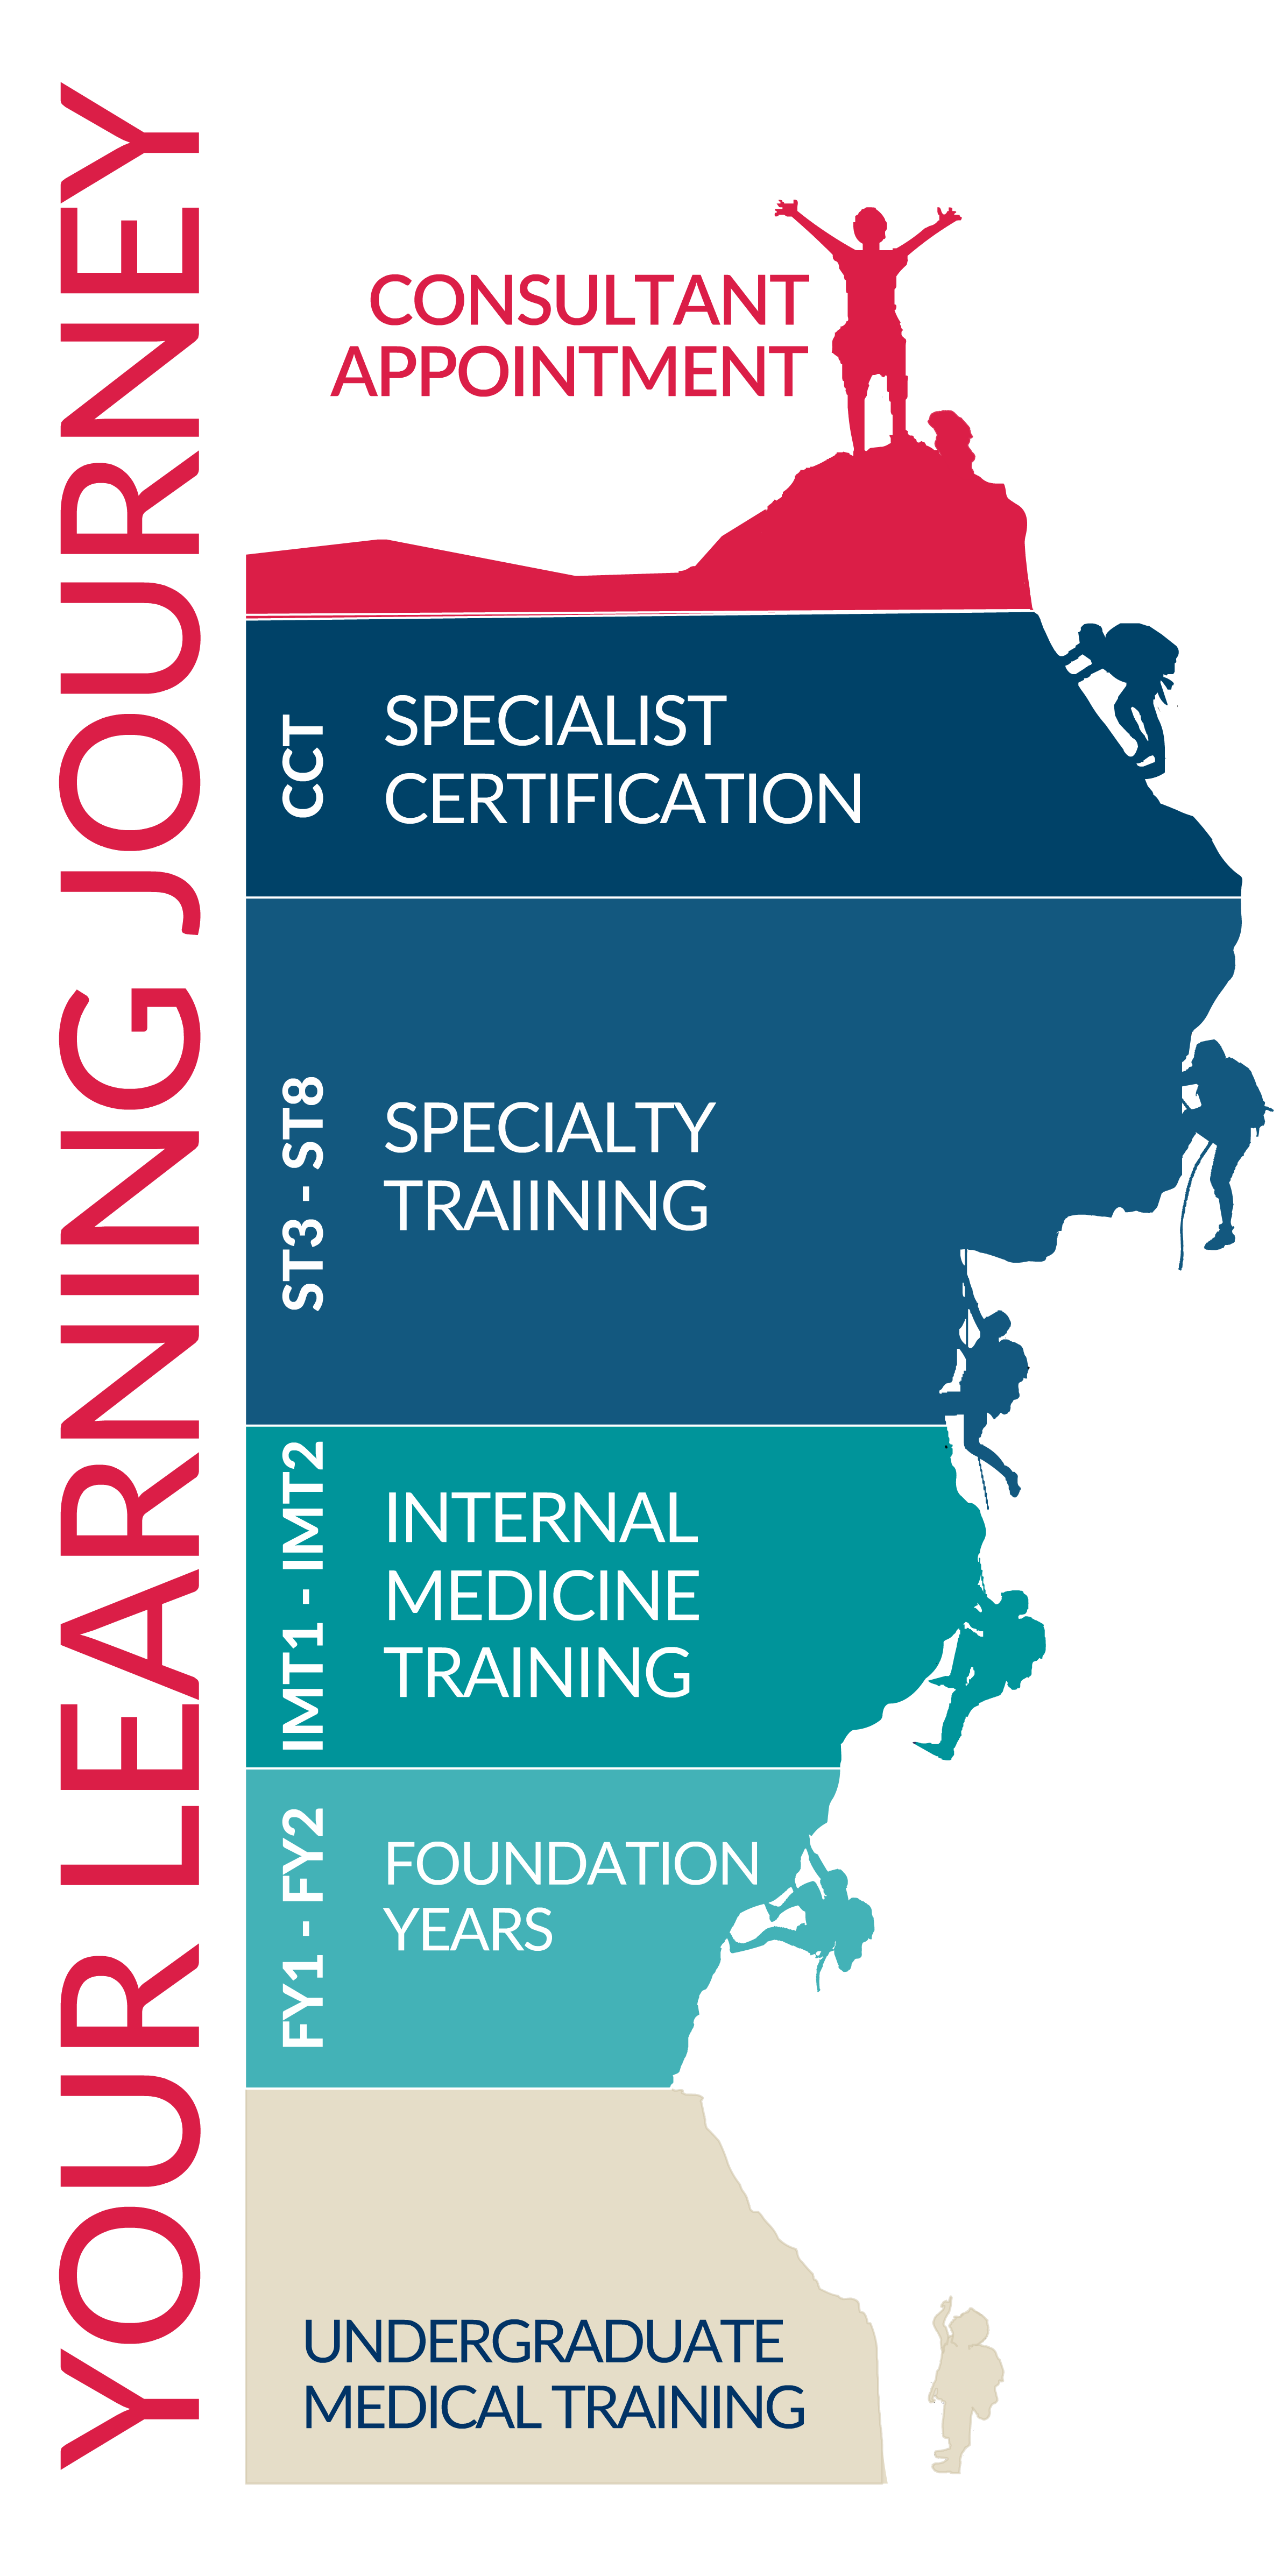 A graphic to show the medical education training pathway